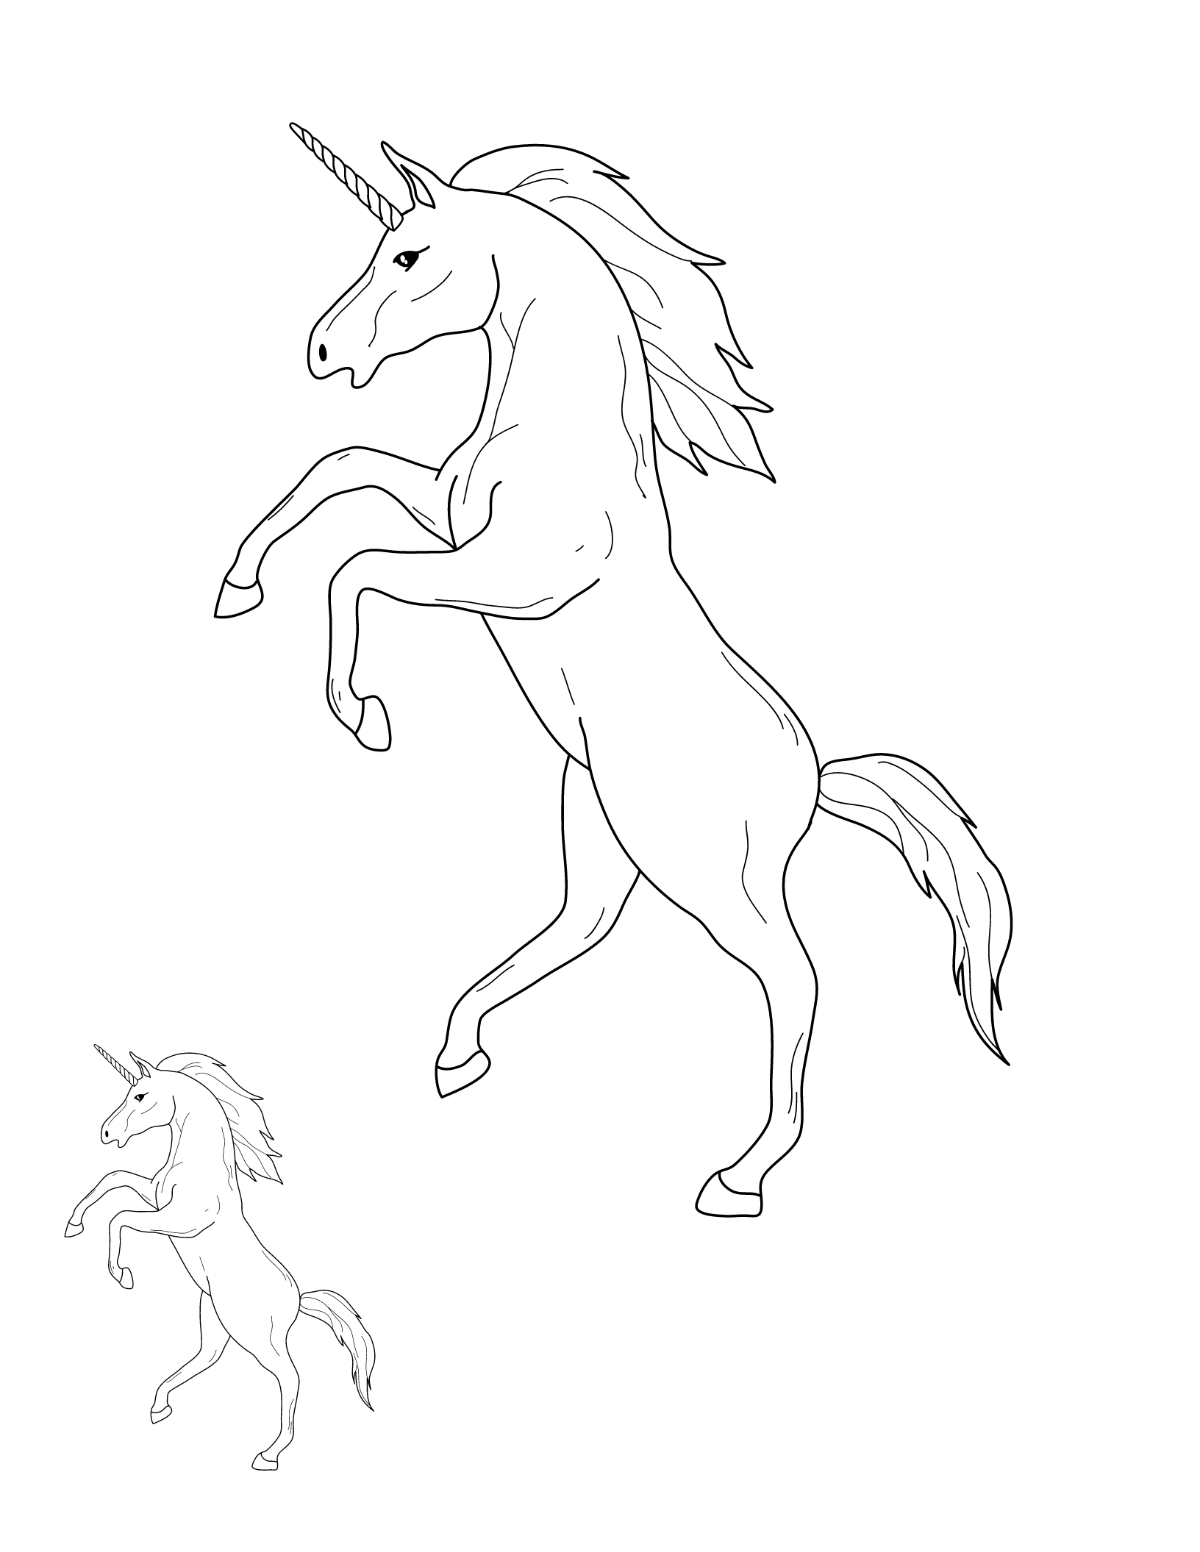 Rearing Unicorn Coloring Page